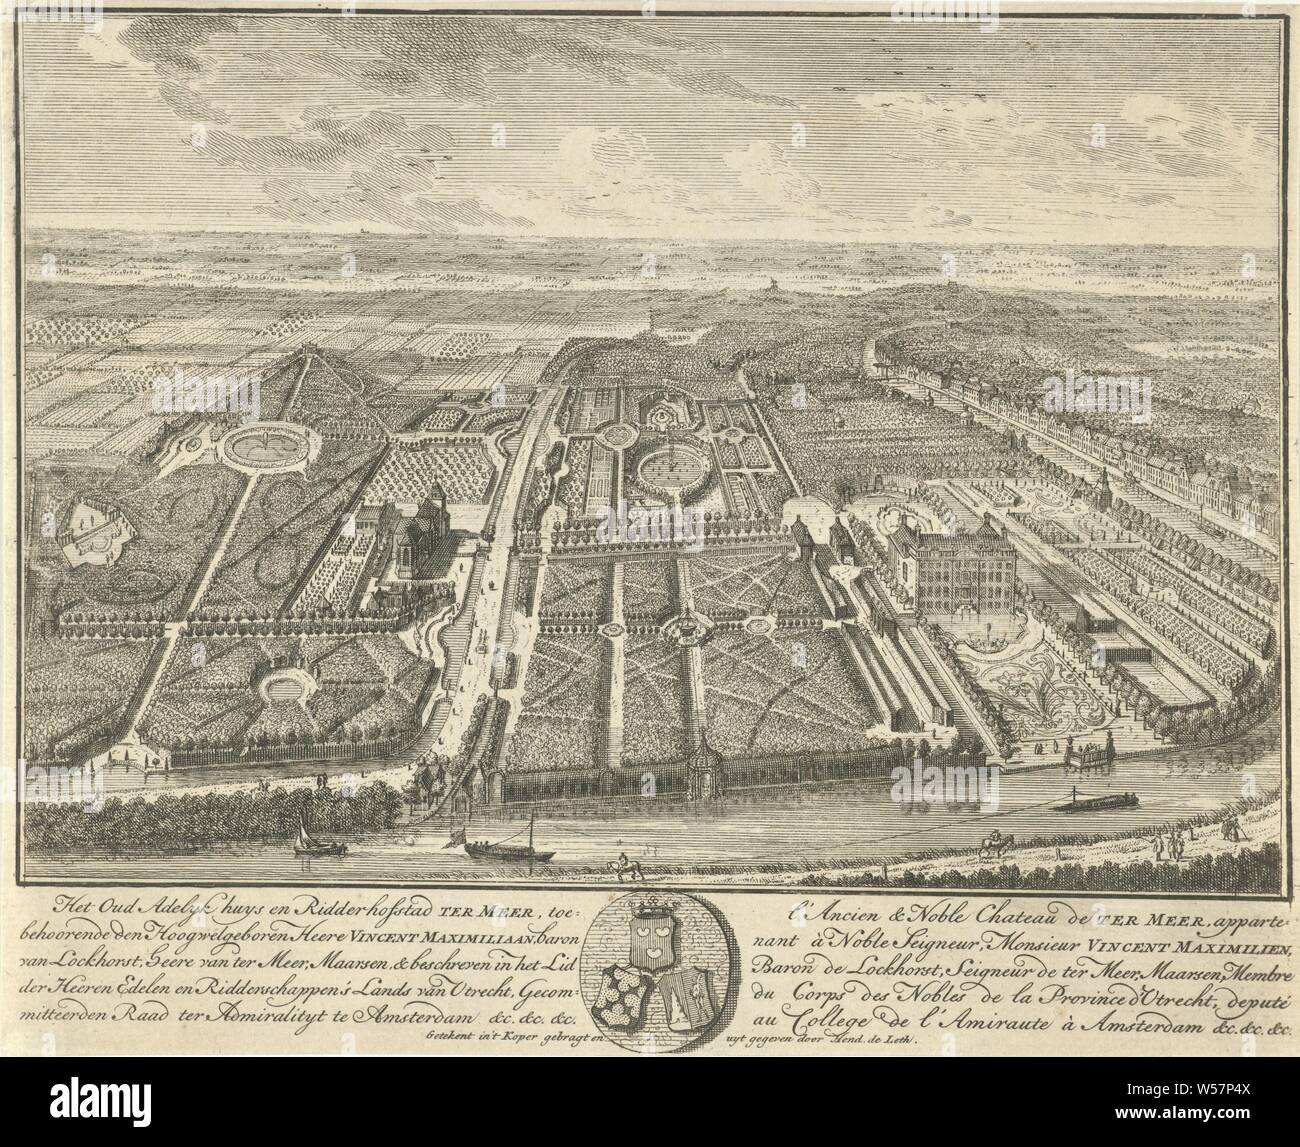 Bird's eye view of Huis ter Meer in Maarssen The Oud Adelyk houses and Ridderhofstad Ter Meer (series title on object), Bird's eye view of Huis ter Meer and the surrounding French gardens. In the margin an oval with three coats of arms, left and right a Dutch and French caption. The print is part of a series with 26 faces on Huis ter Meer and the accompanying estate in Maarssen, country house, French or architectonic garden, formal garden, Huis Ter Meer, Hendrik de Leth (mentioned on object), c. 1740, paper, etching, h 174 mm × w 213 mm Stock Photo